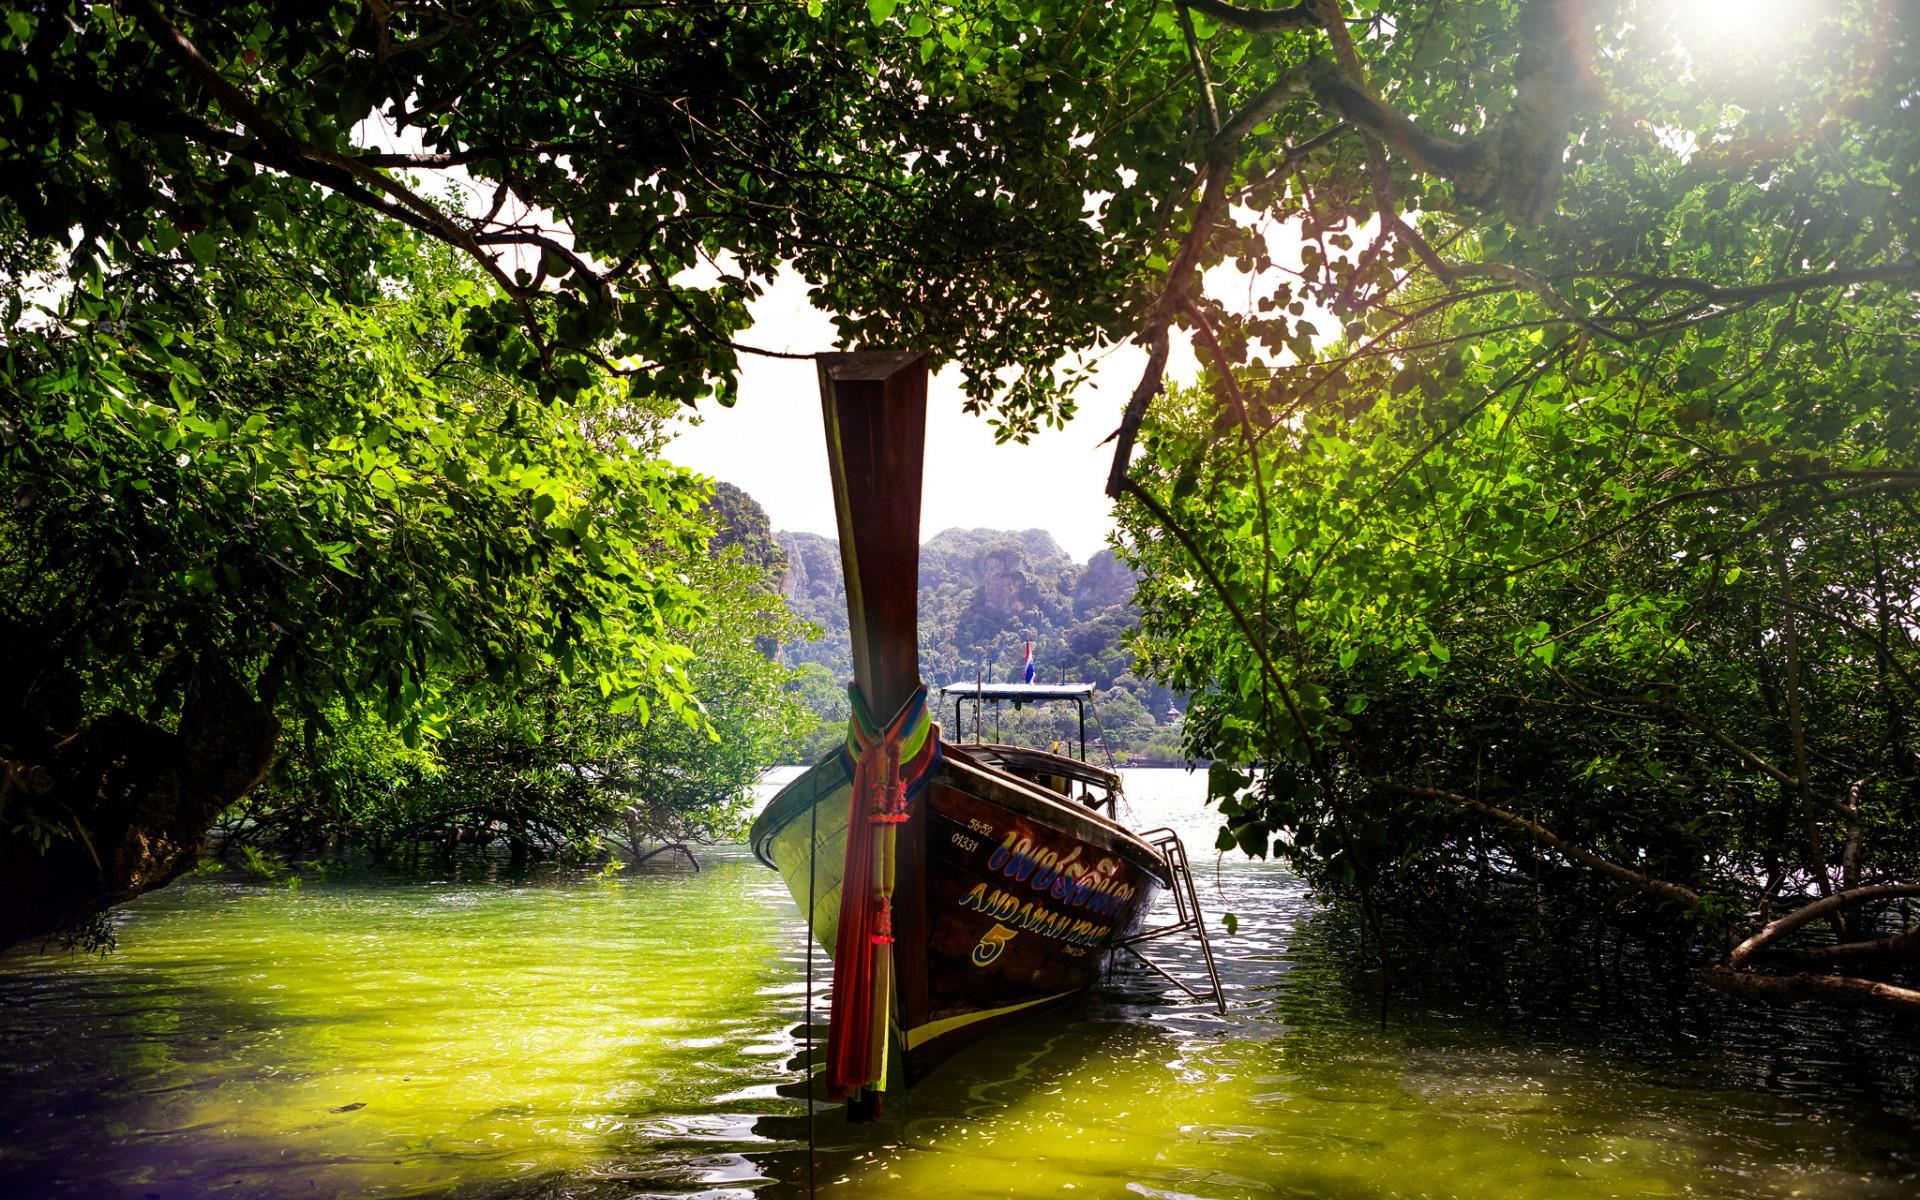 summer, lakes, tranquility, tropical, boat, Thailand, hills